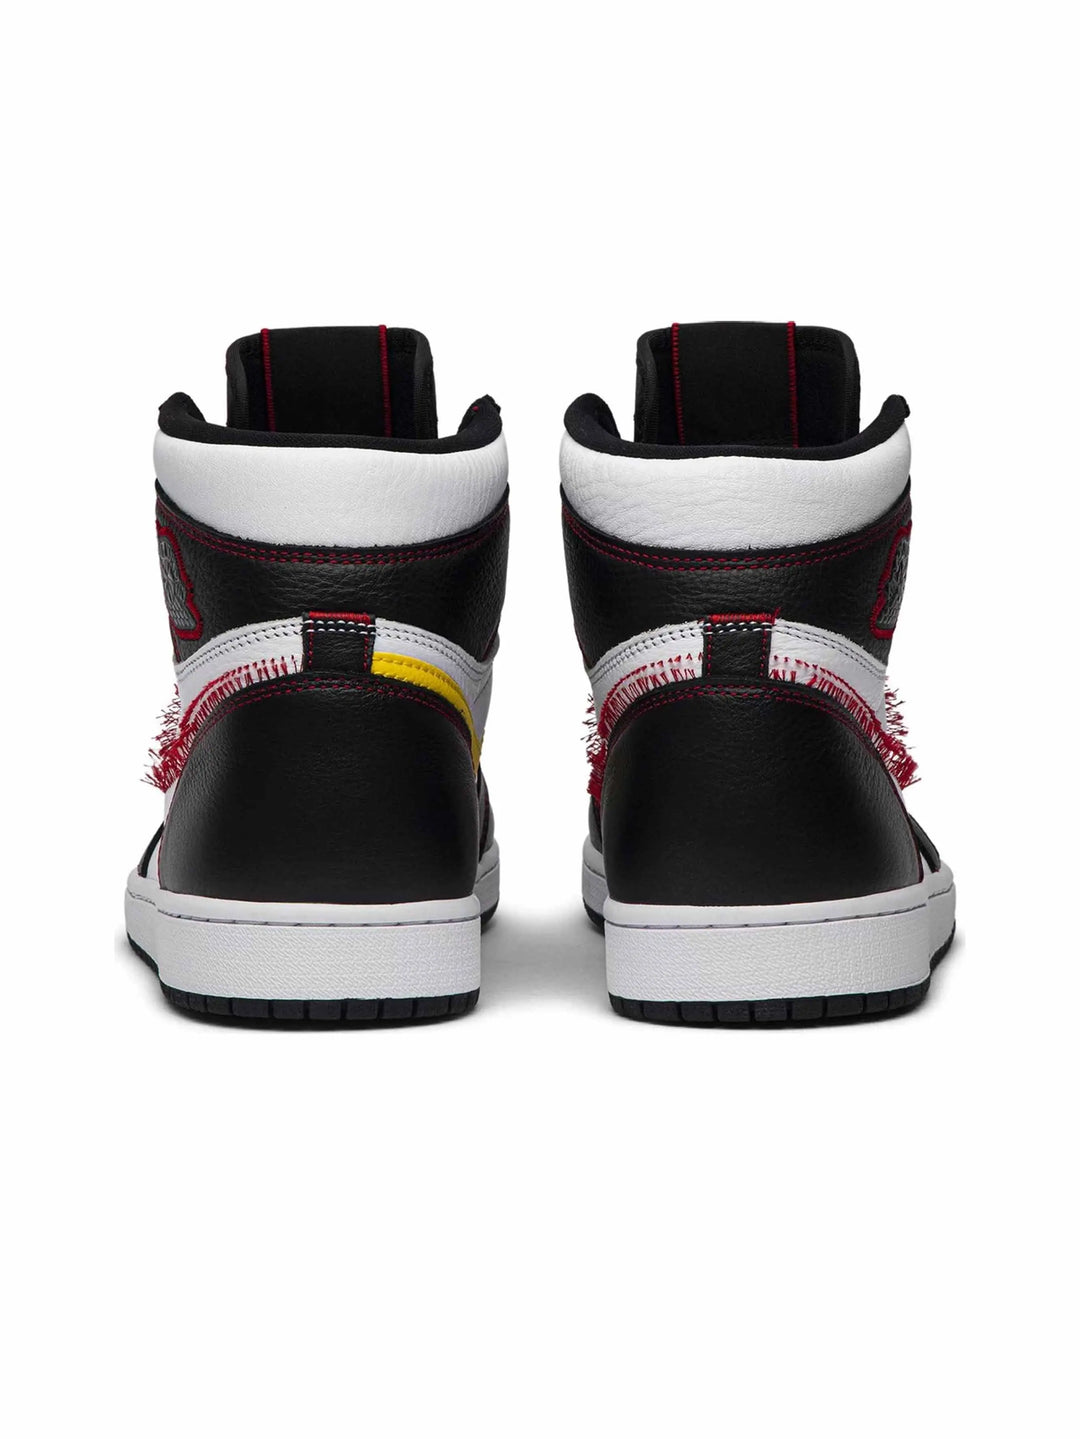 Nike Air Jordan 1 Retro High Defiant White Black Gym Red in Auckland, New Zealand - Shop name